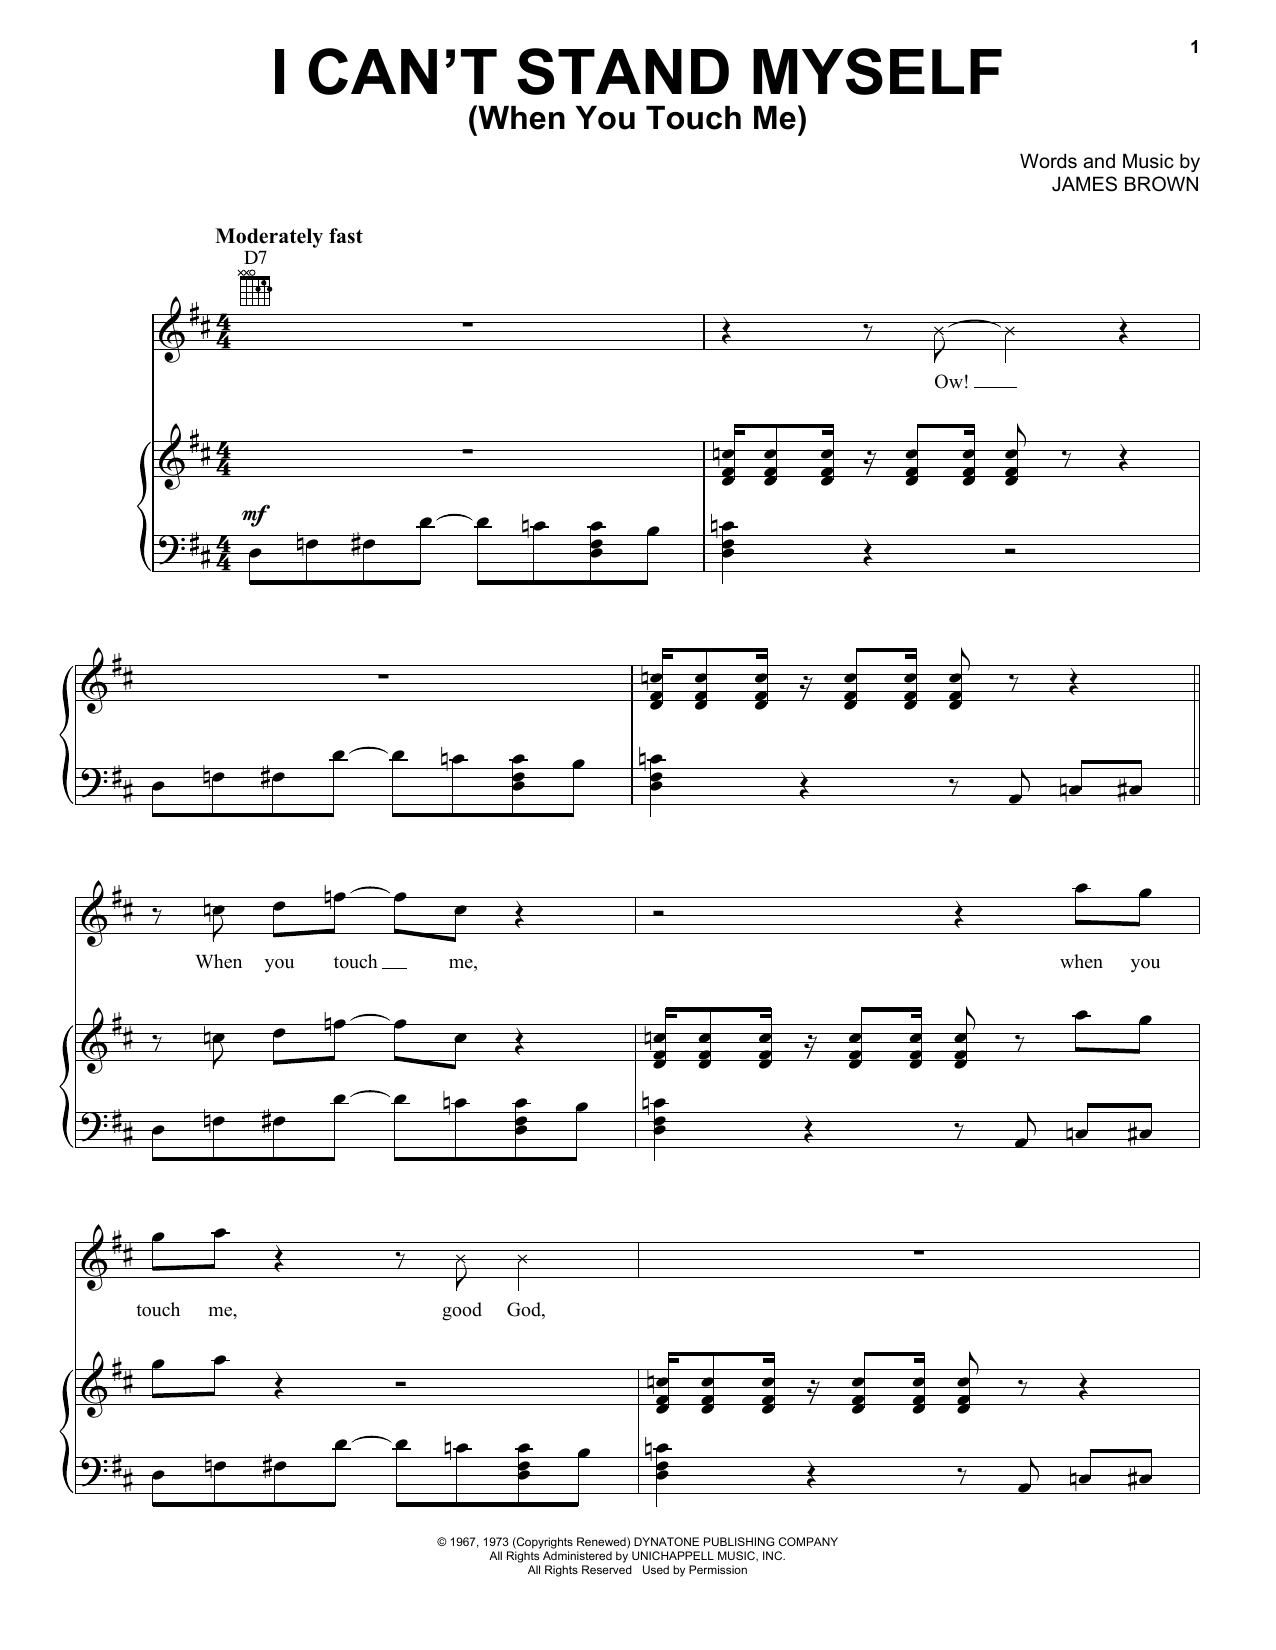 Download James Brown I Can't Stand Myself (When You Touch Me Sheet Music